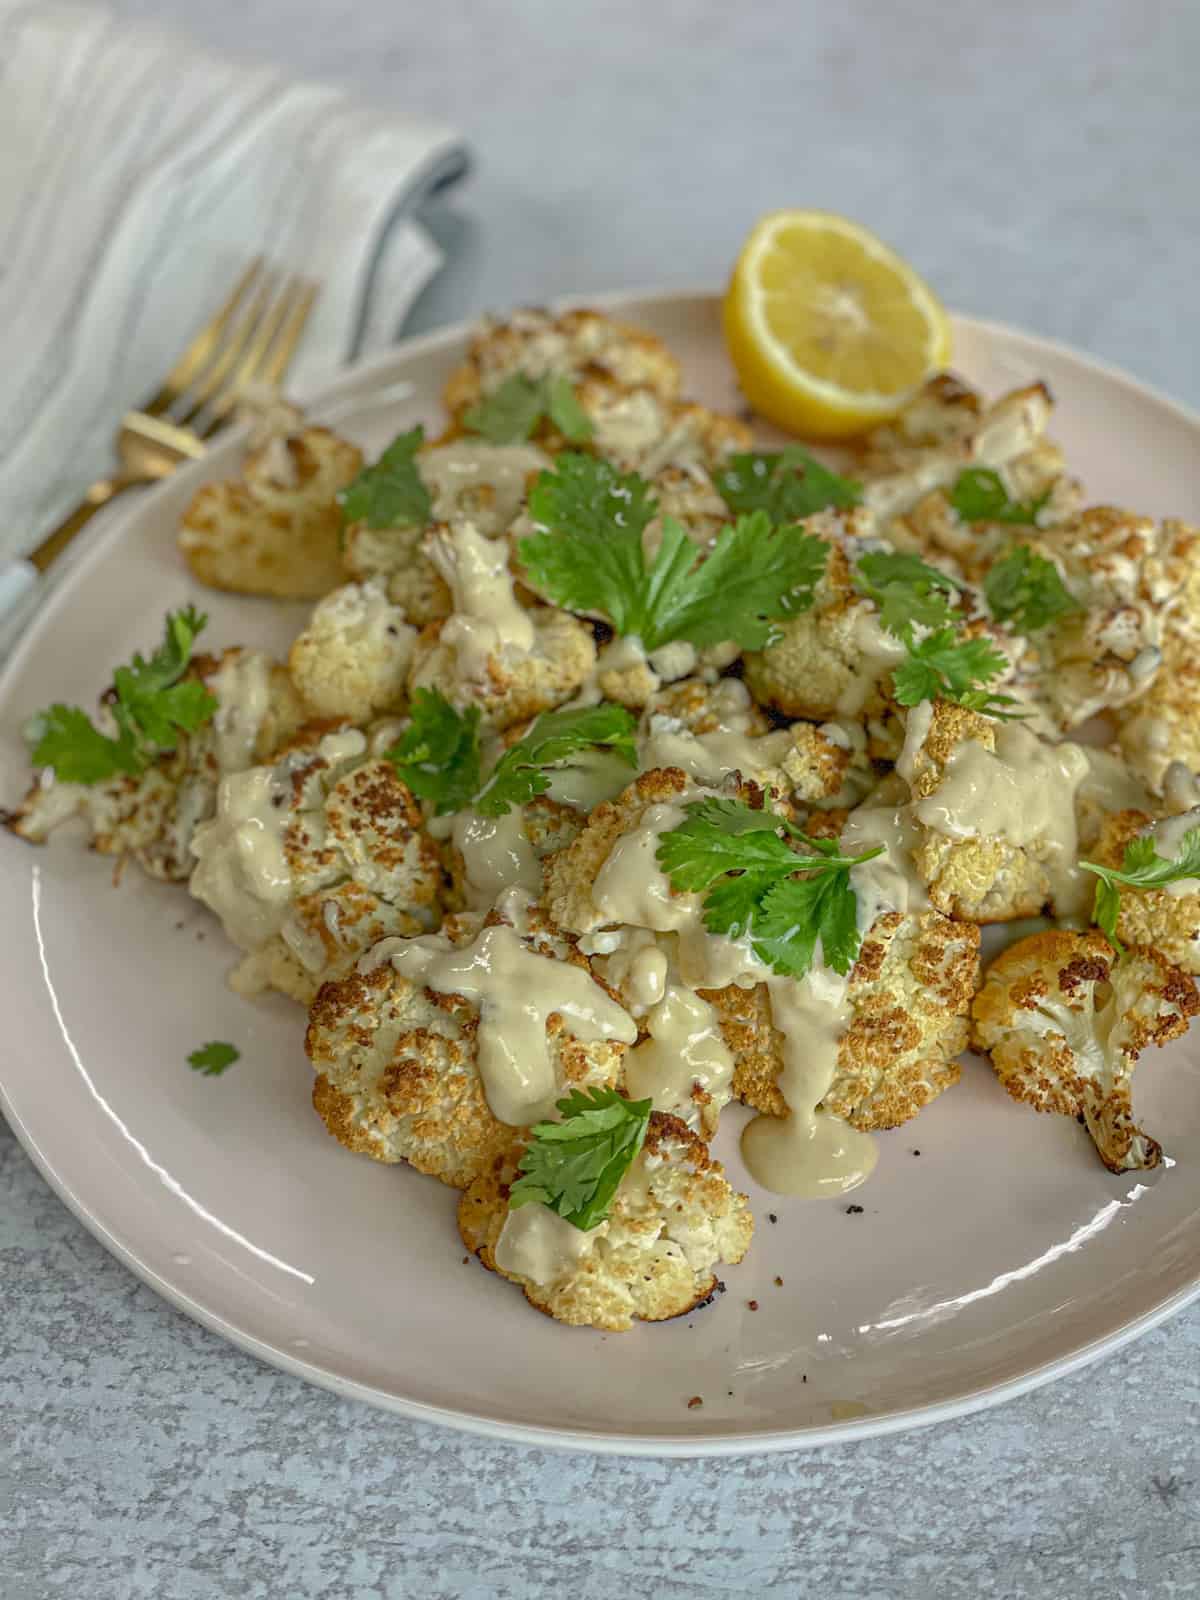 A plate of roasted cauliflower with a side of lemon and a tahini dressing topping.